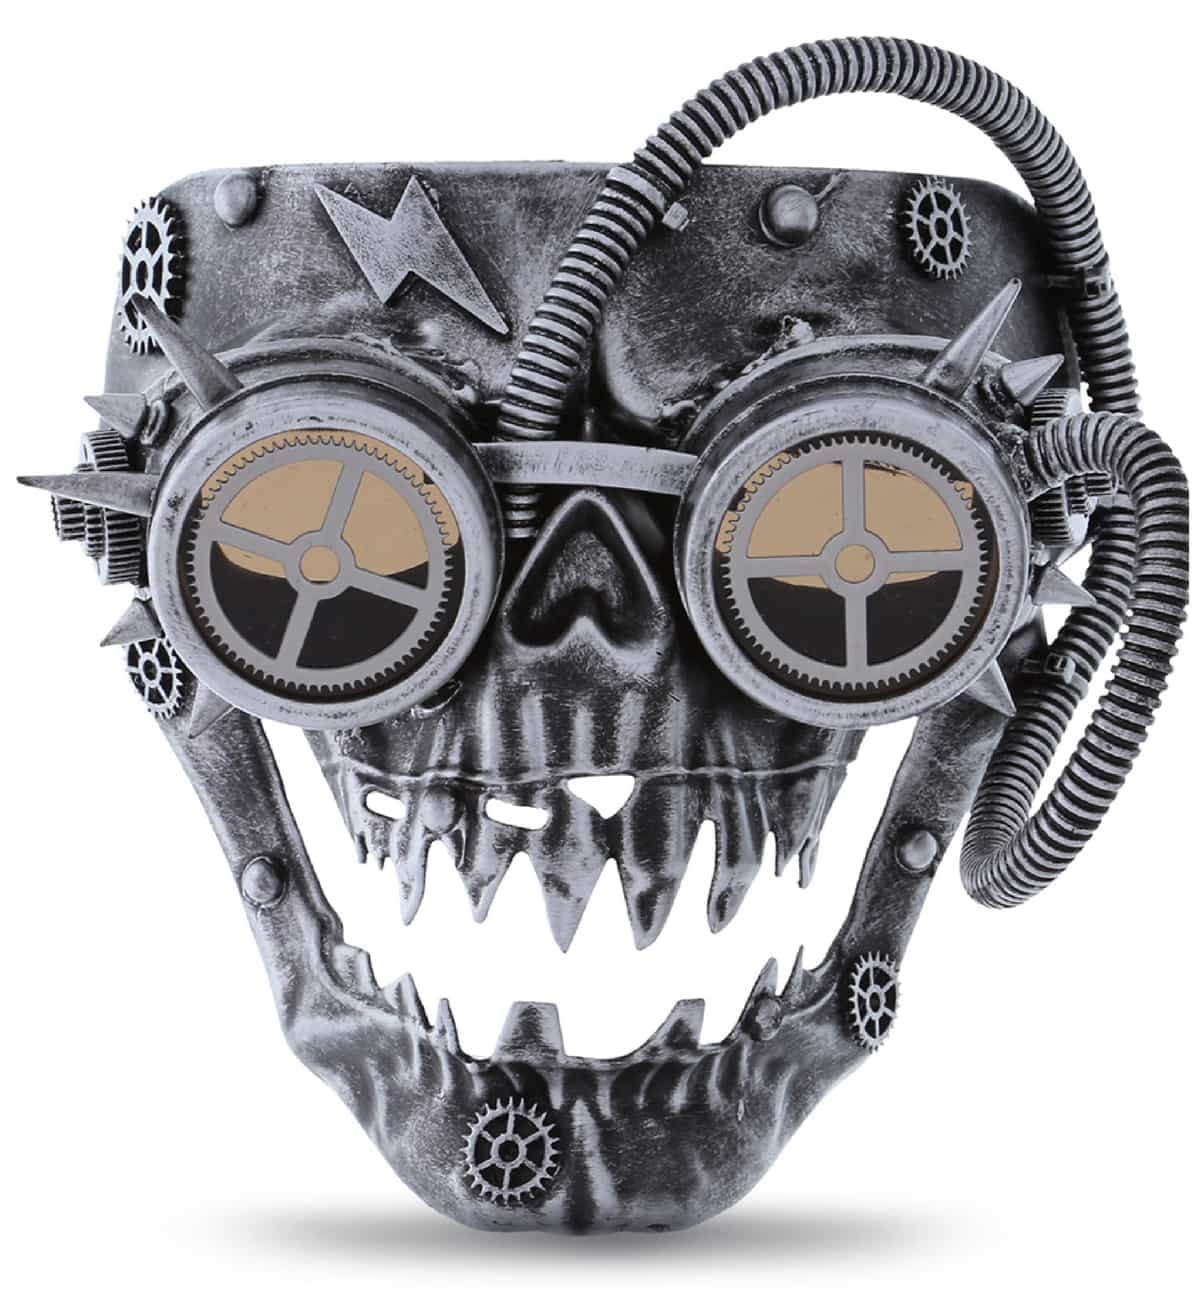 Steel Master Plague Bird Doctor Mask with Goggles Gothic Face Mask Cosplay Fancy Rock Mask